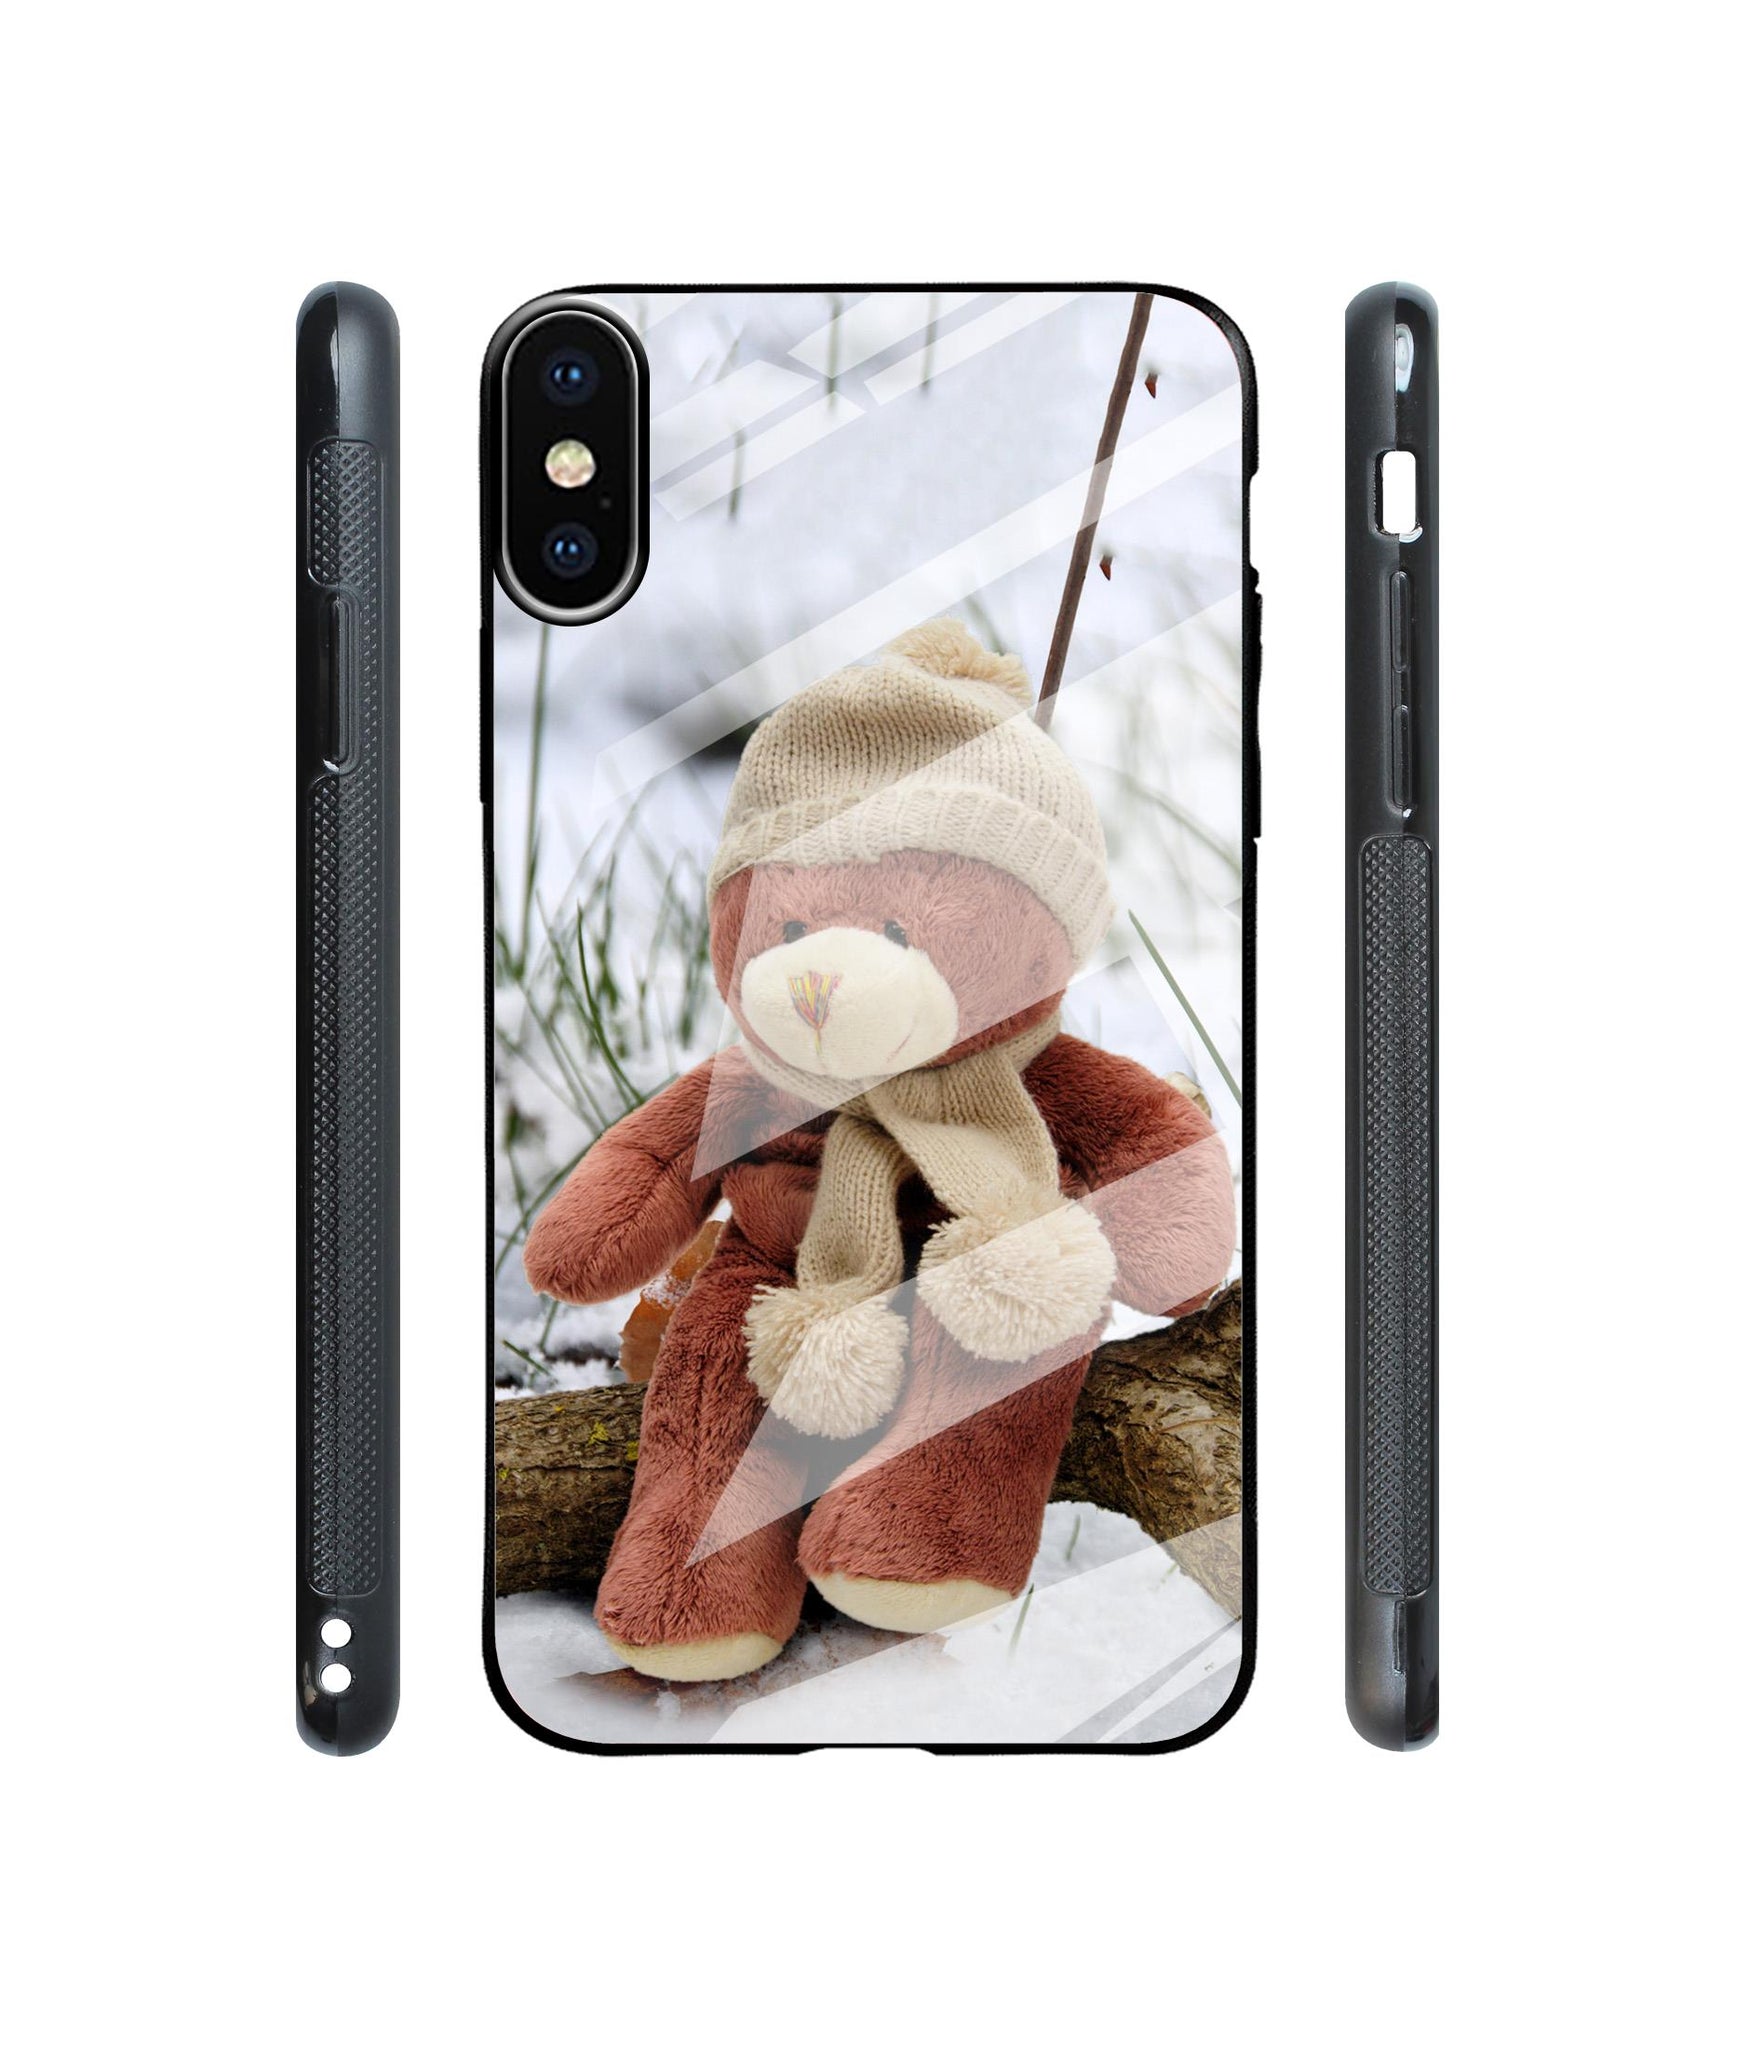 Woolen Bear Designer Printed Glass Cover for Apple iPhone X / Xs